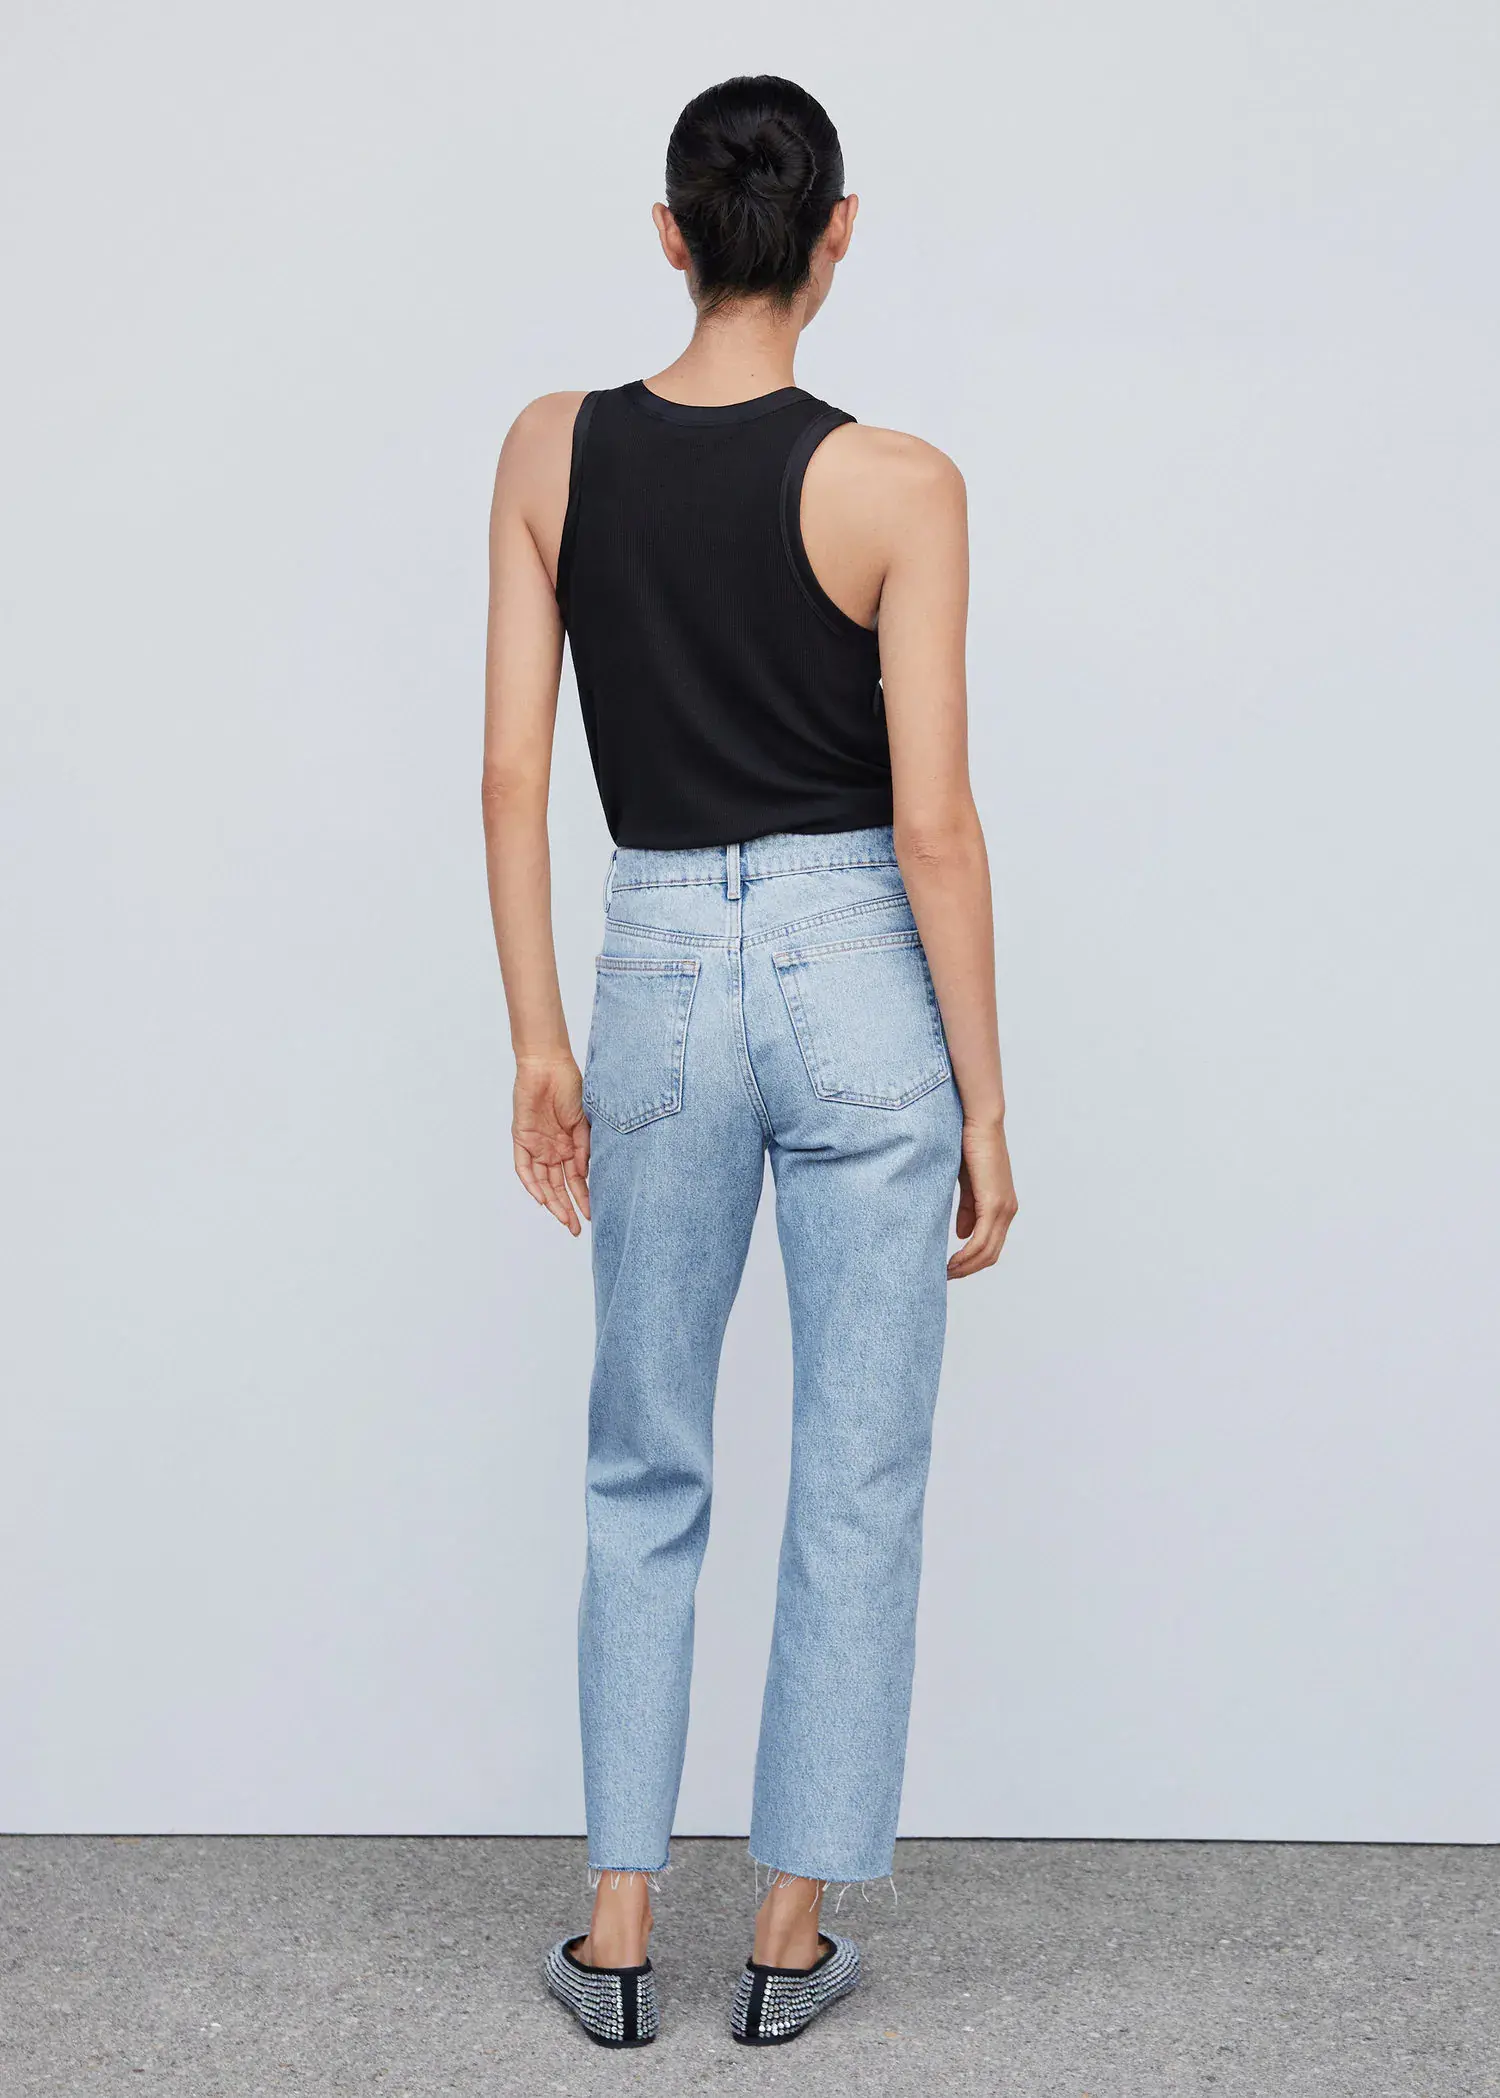 Mango High waist straight jeans. a woman wearing a black tank top and jeans. 